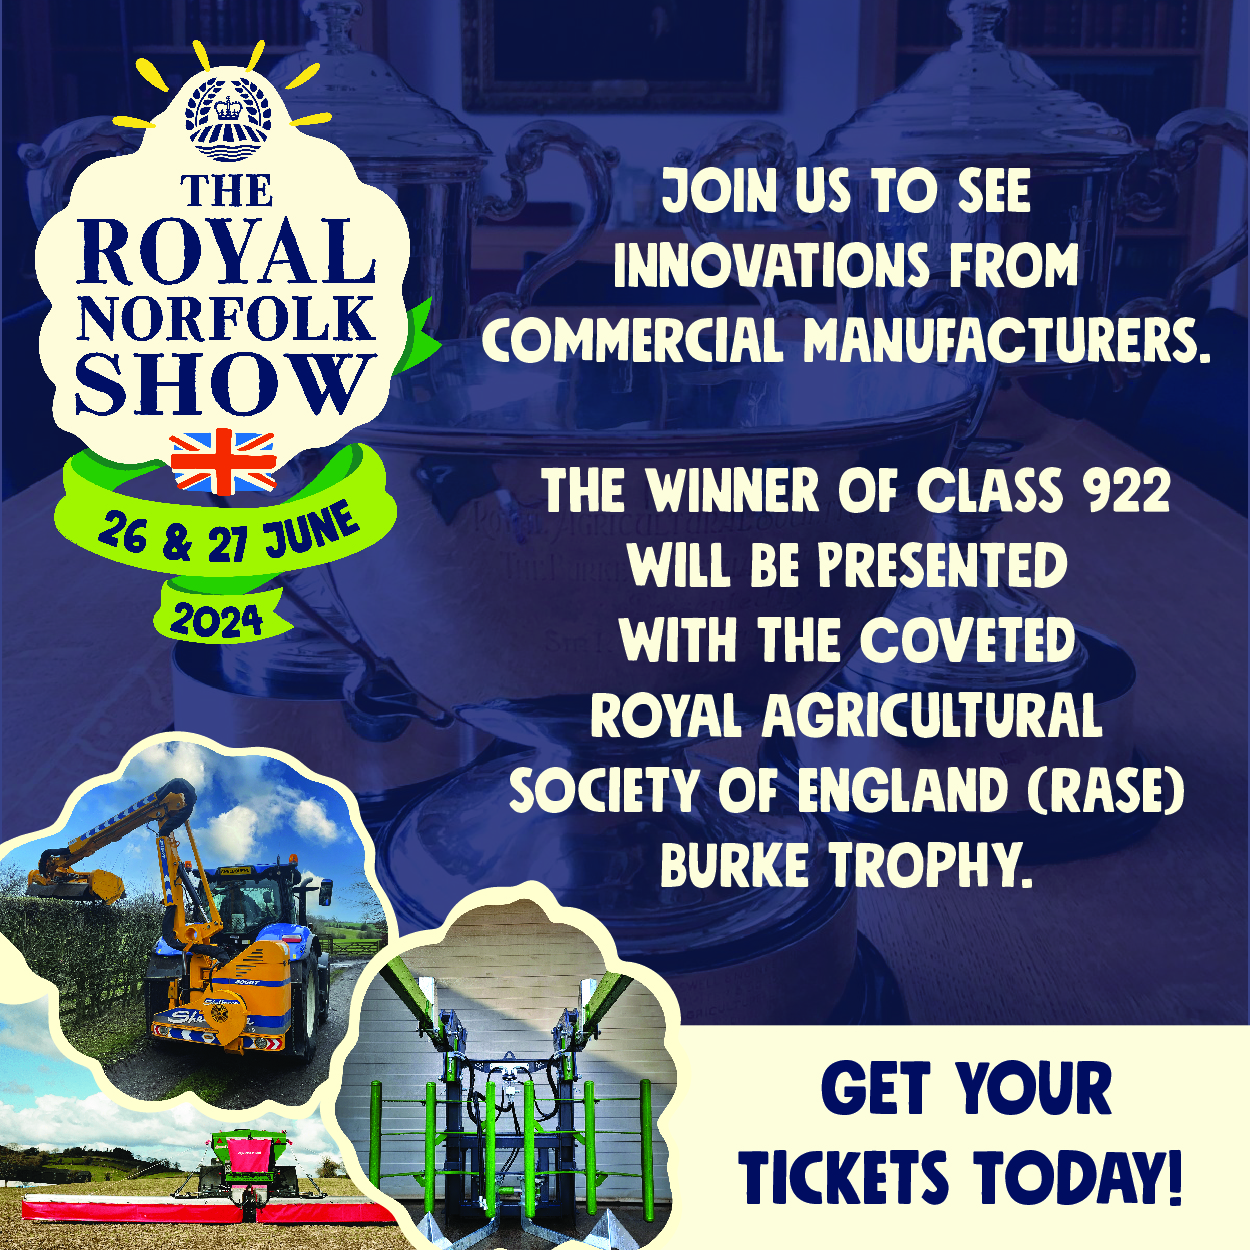 The Royal Norfolk Show event advert on farm machinery website